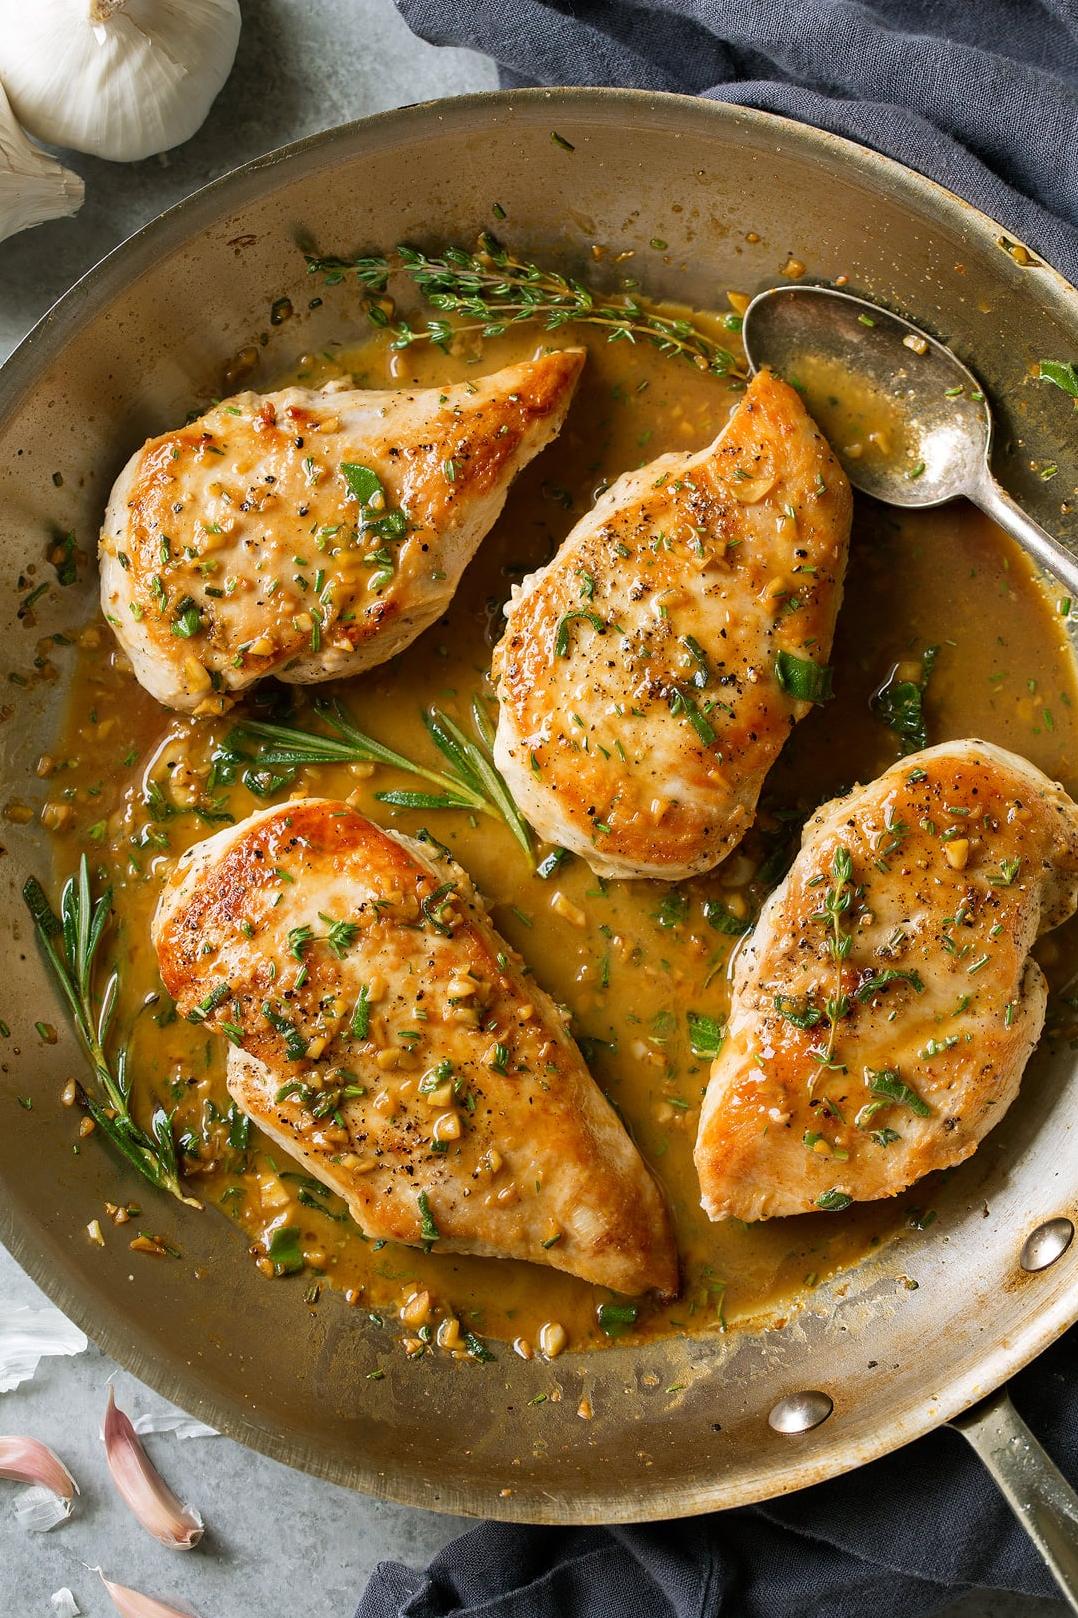  A dish that screams elegance: Sauteed Chicken Breasts in Butter With Brown Wine Sauce.